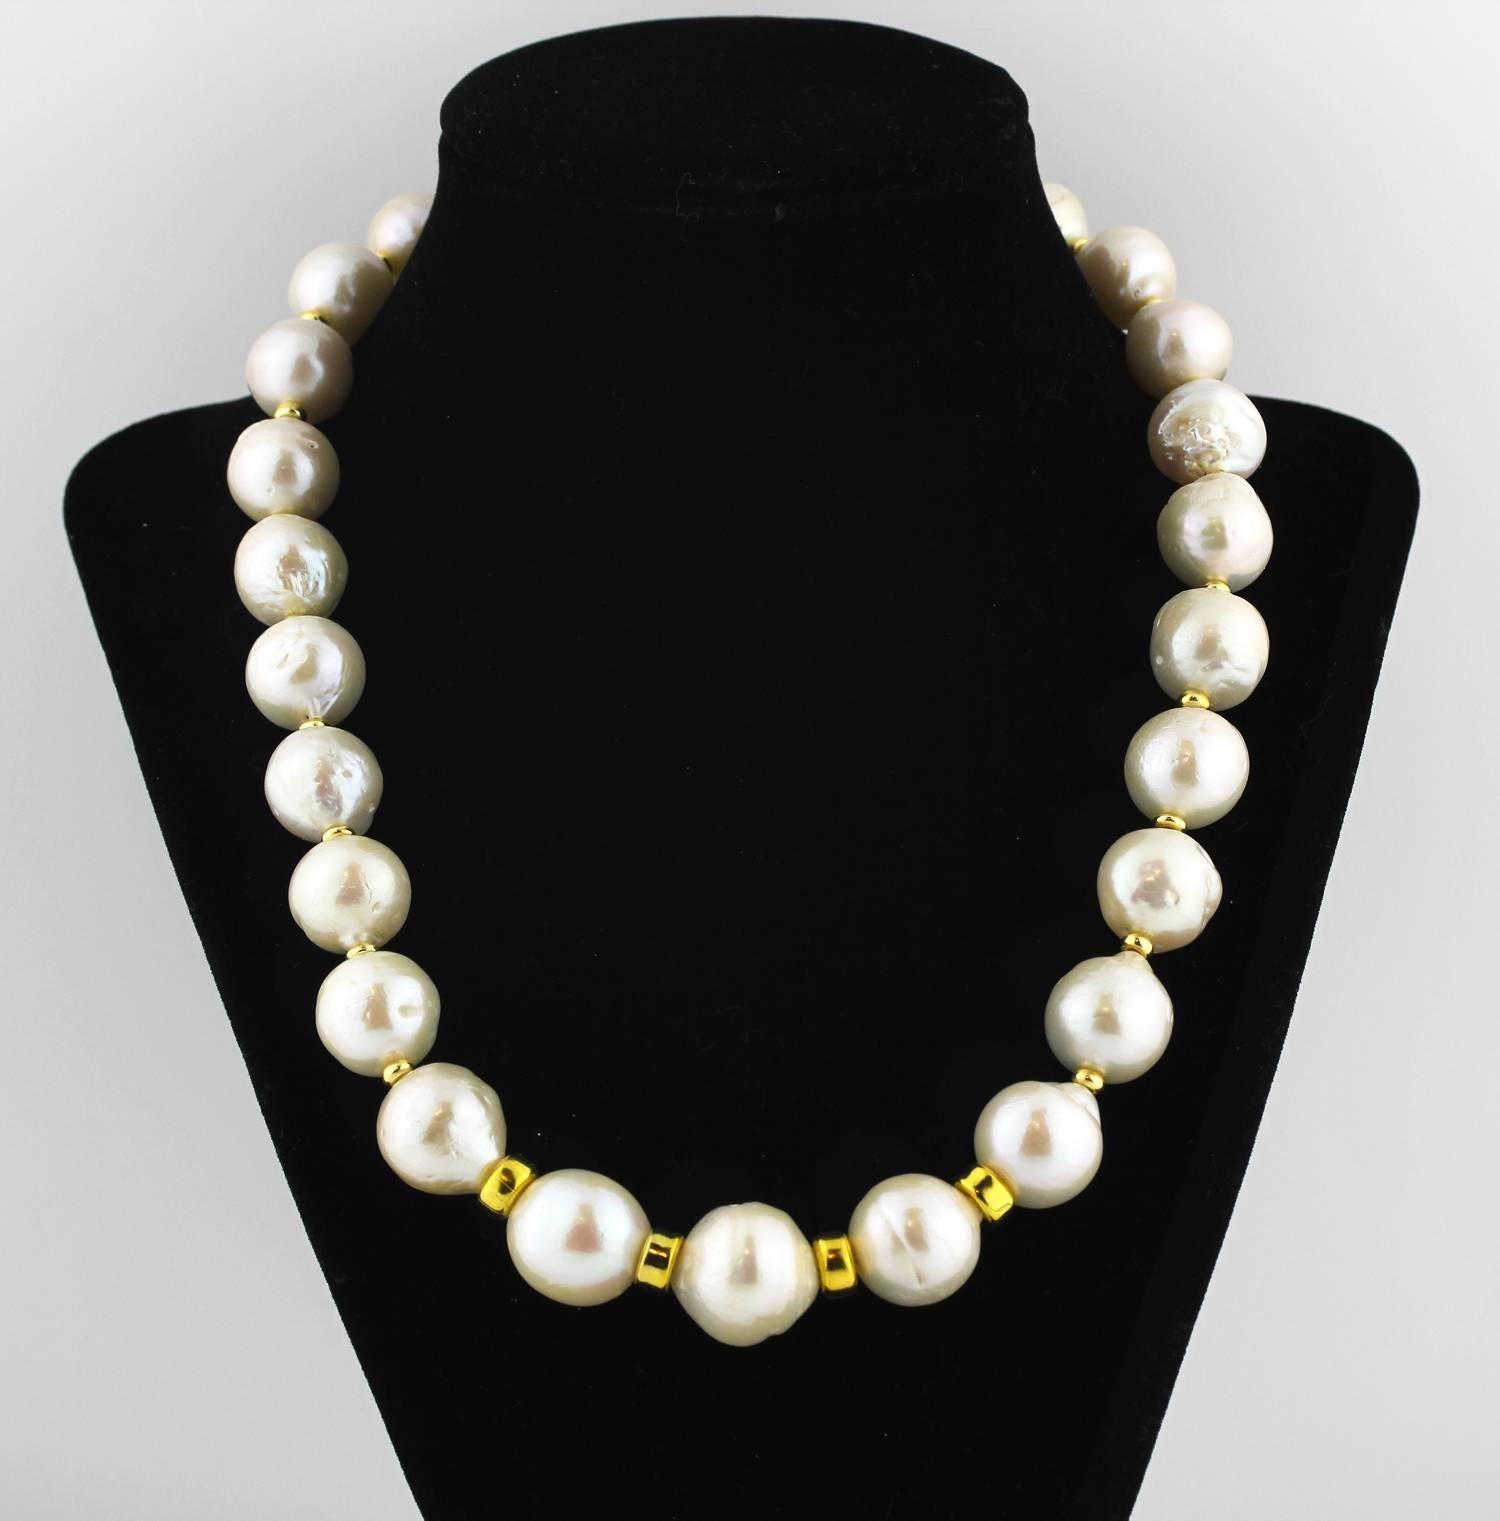 Slightly graduated extraordinary unique cultured South Sea Pearls with very light gold tone accents make up this handmade necklace.
Size: largest 18mm;  Length:  19 inches;  Clasp:  gold tone.  More from this seller by putting gemjunky into 1stdibs